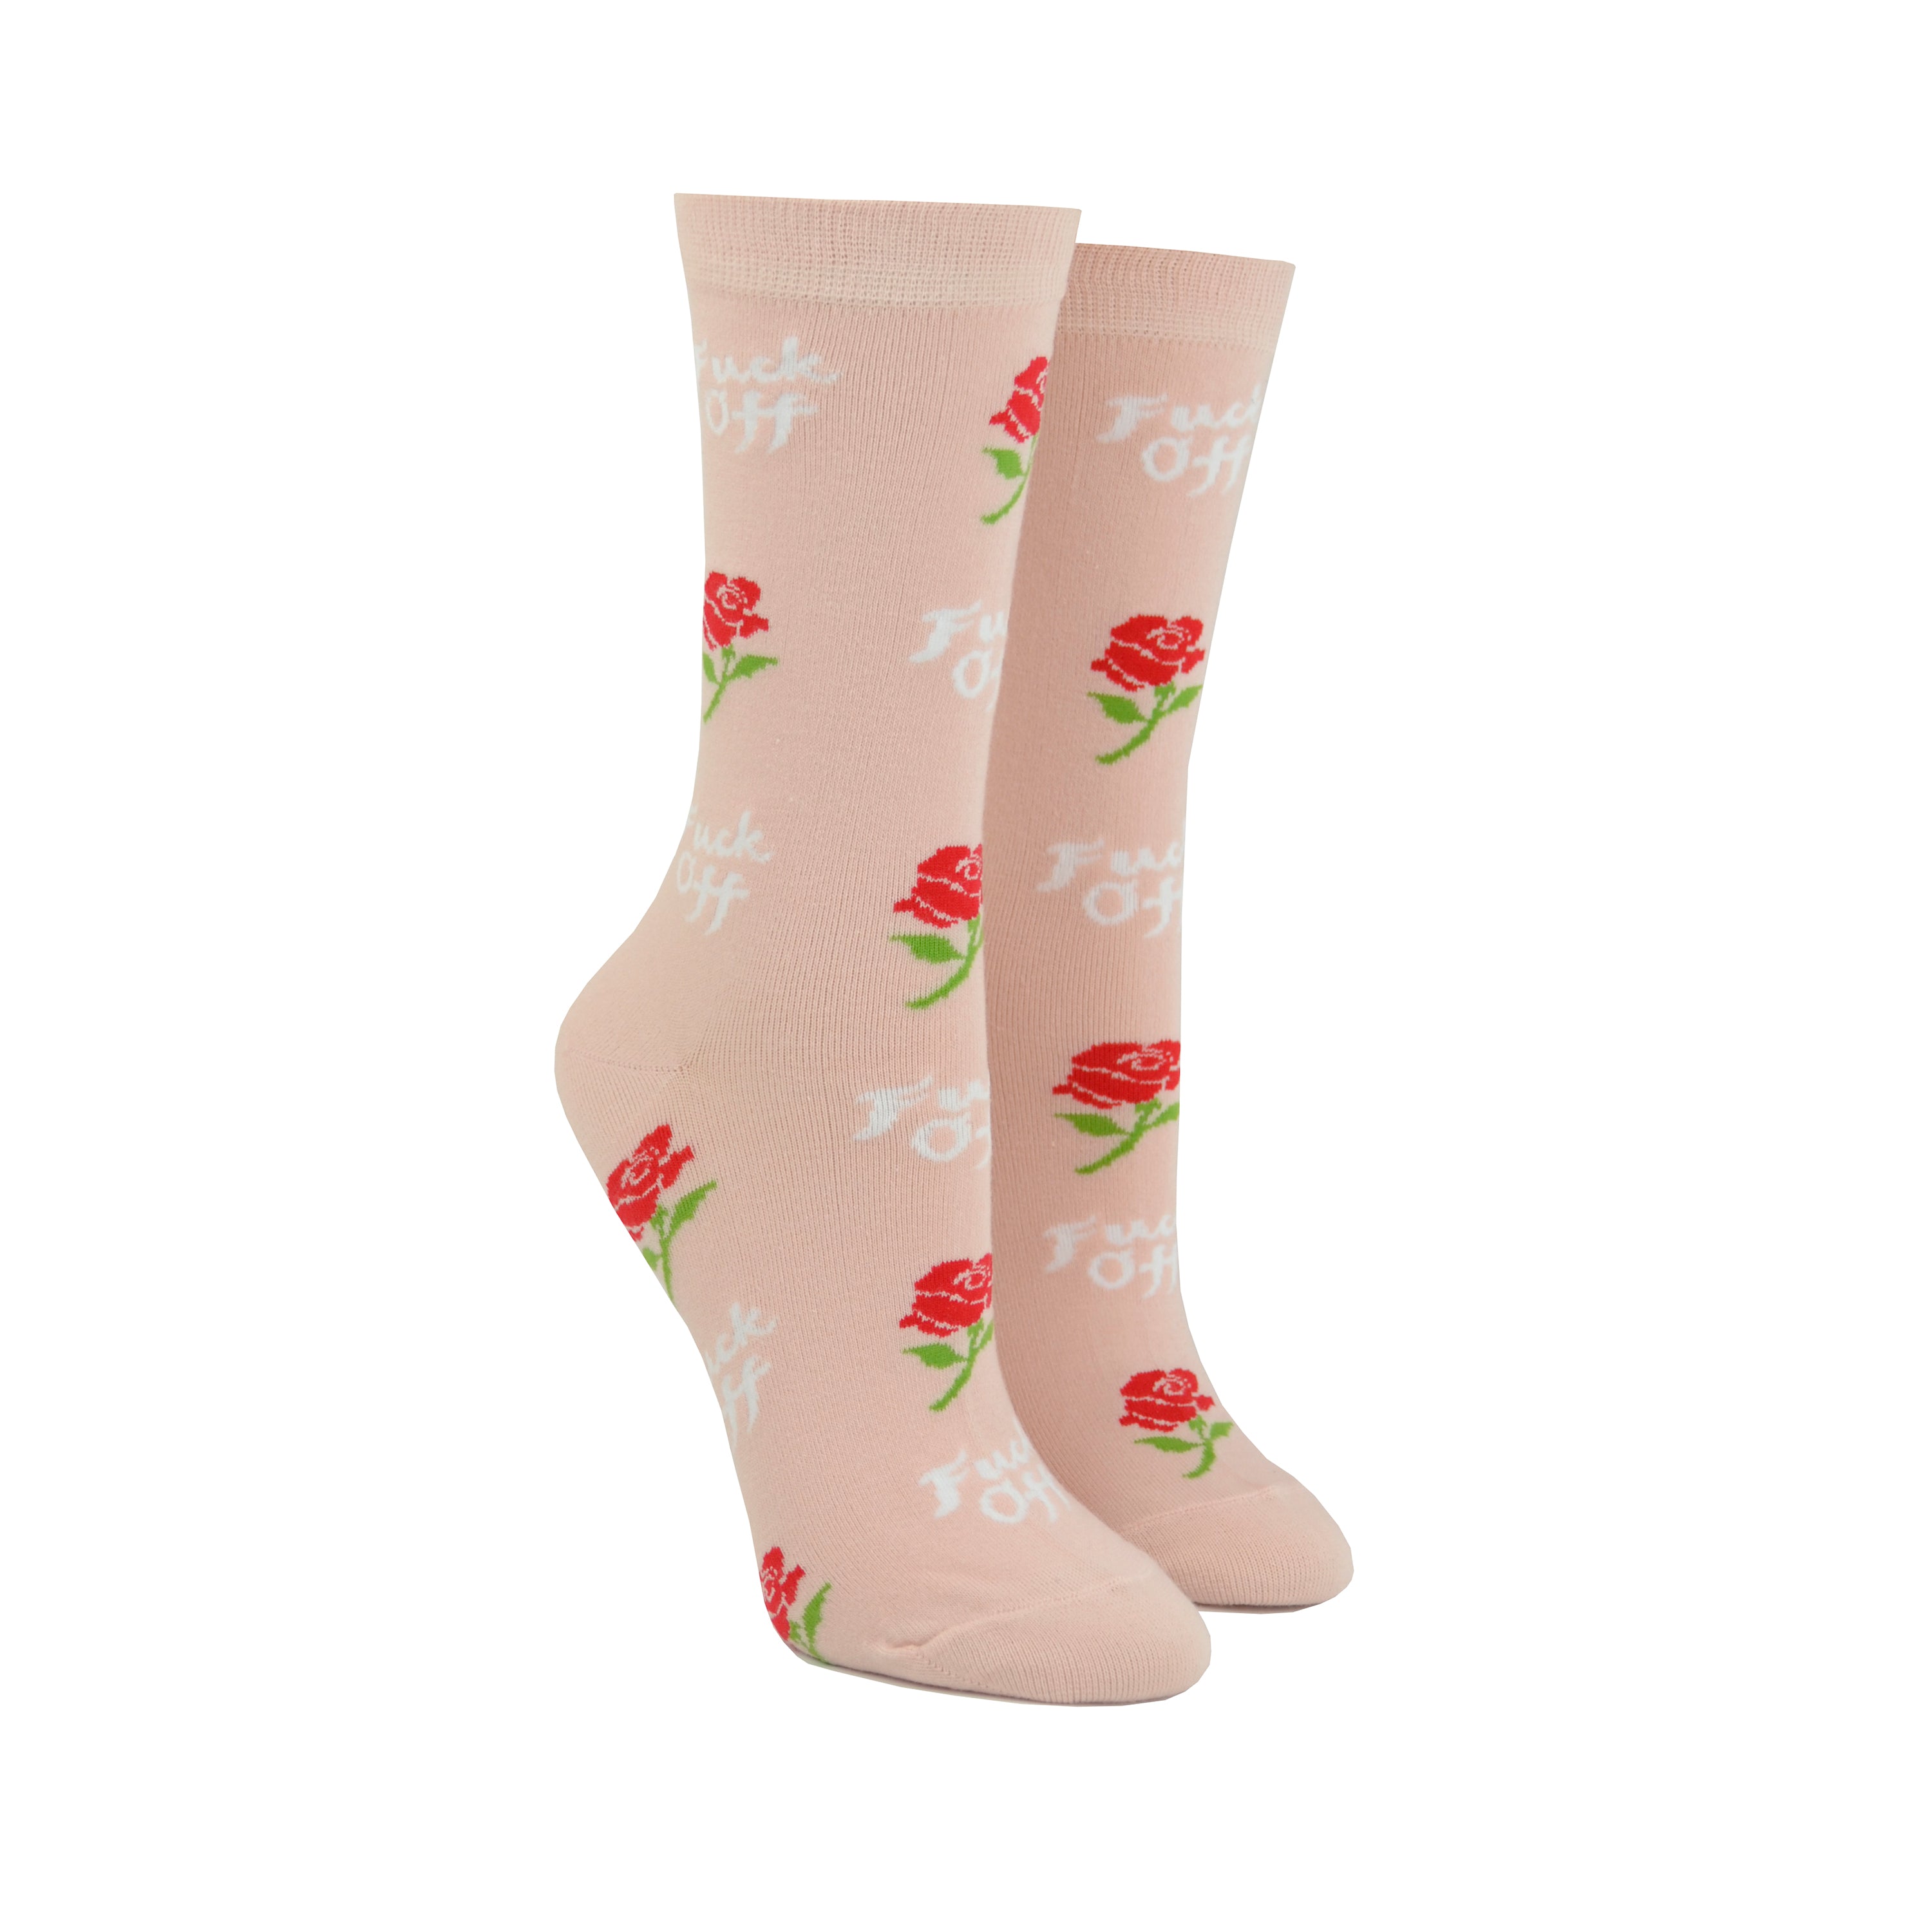 Shown on leg forms, a pair of women's Yellow Owl Workshop pink cotton crew socks with an all over rose and 